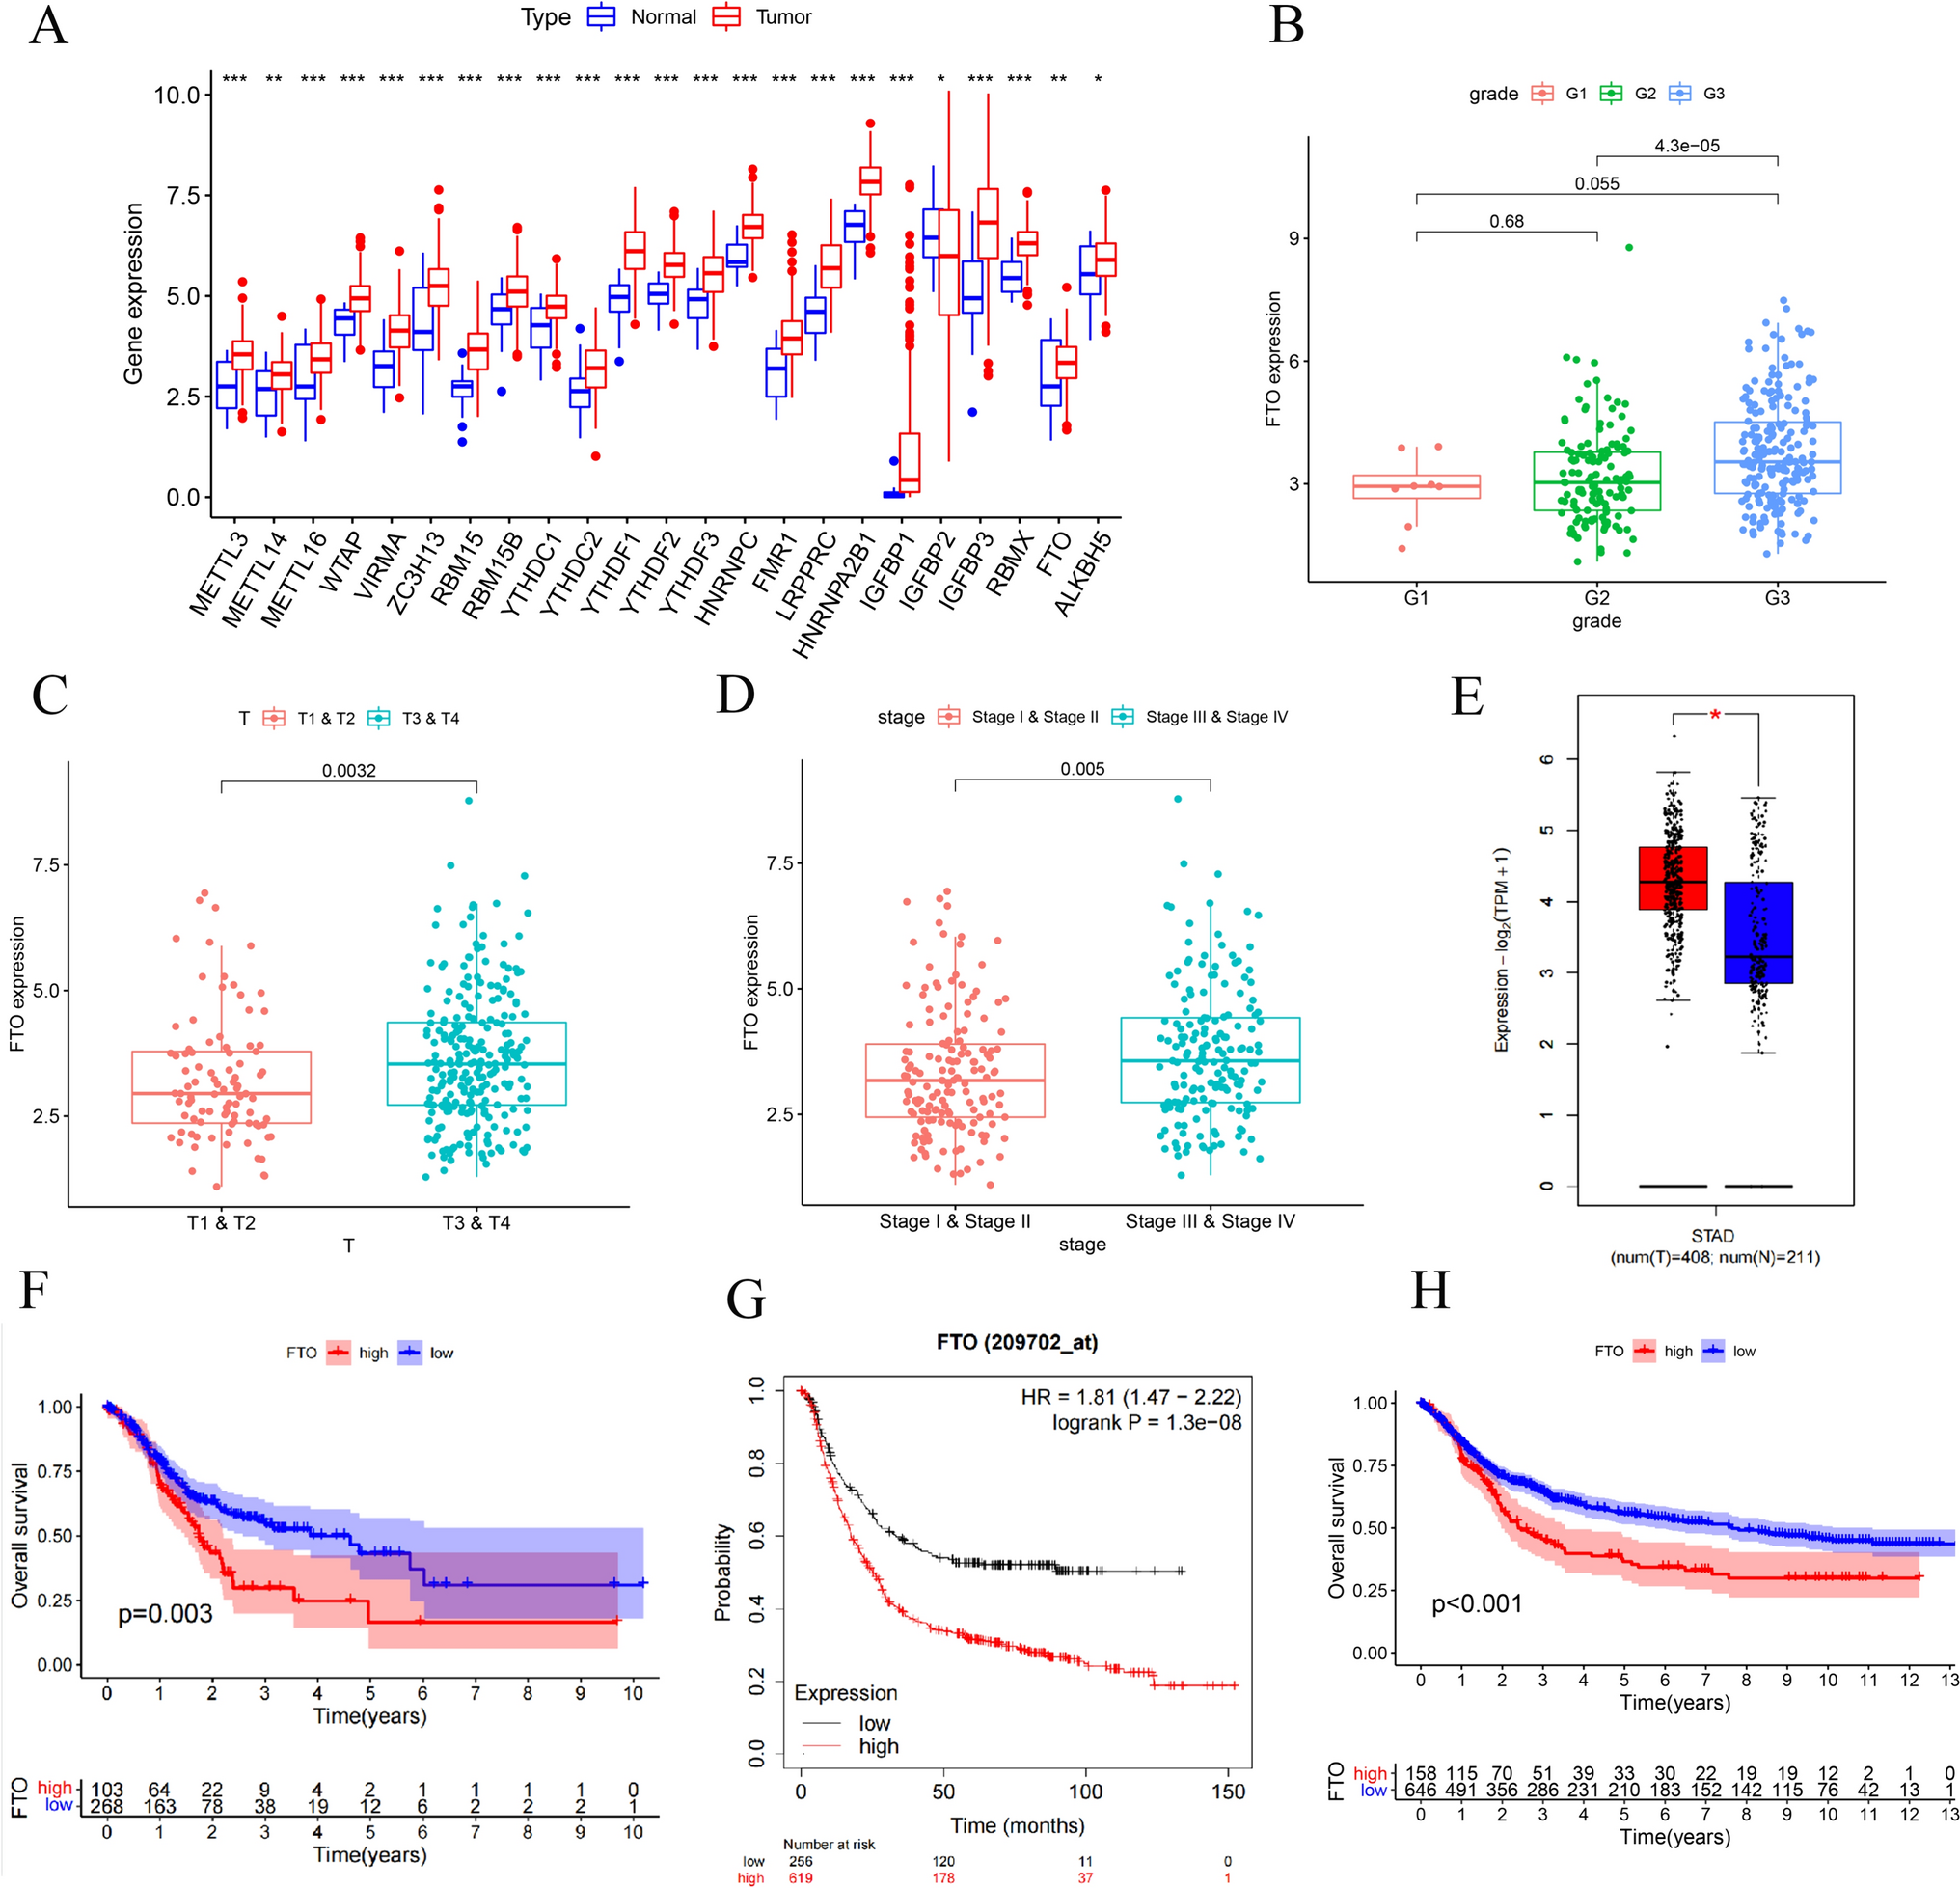 FTO promotes gastric cancer progression by modulating MAP4K4 expression via demethylation in an m6A-dependent manner